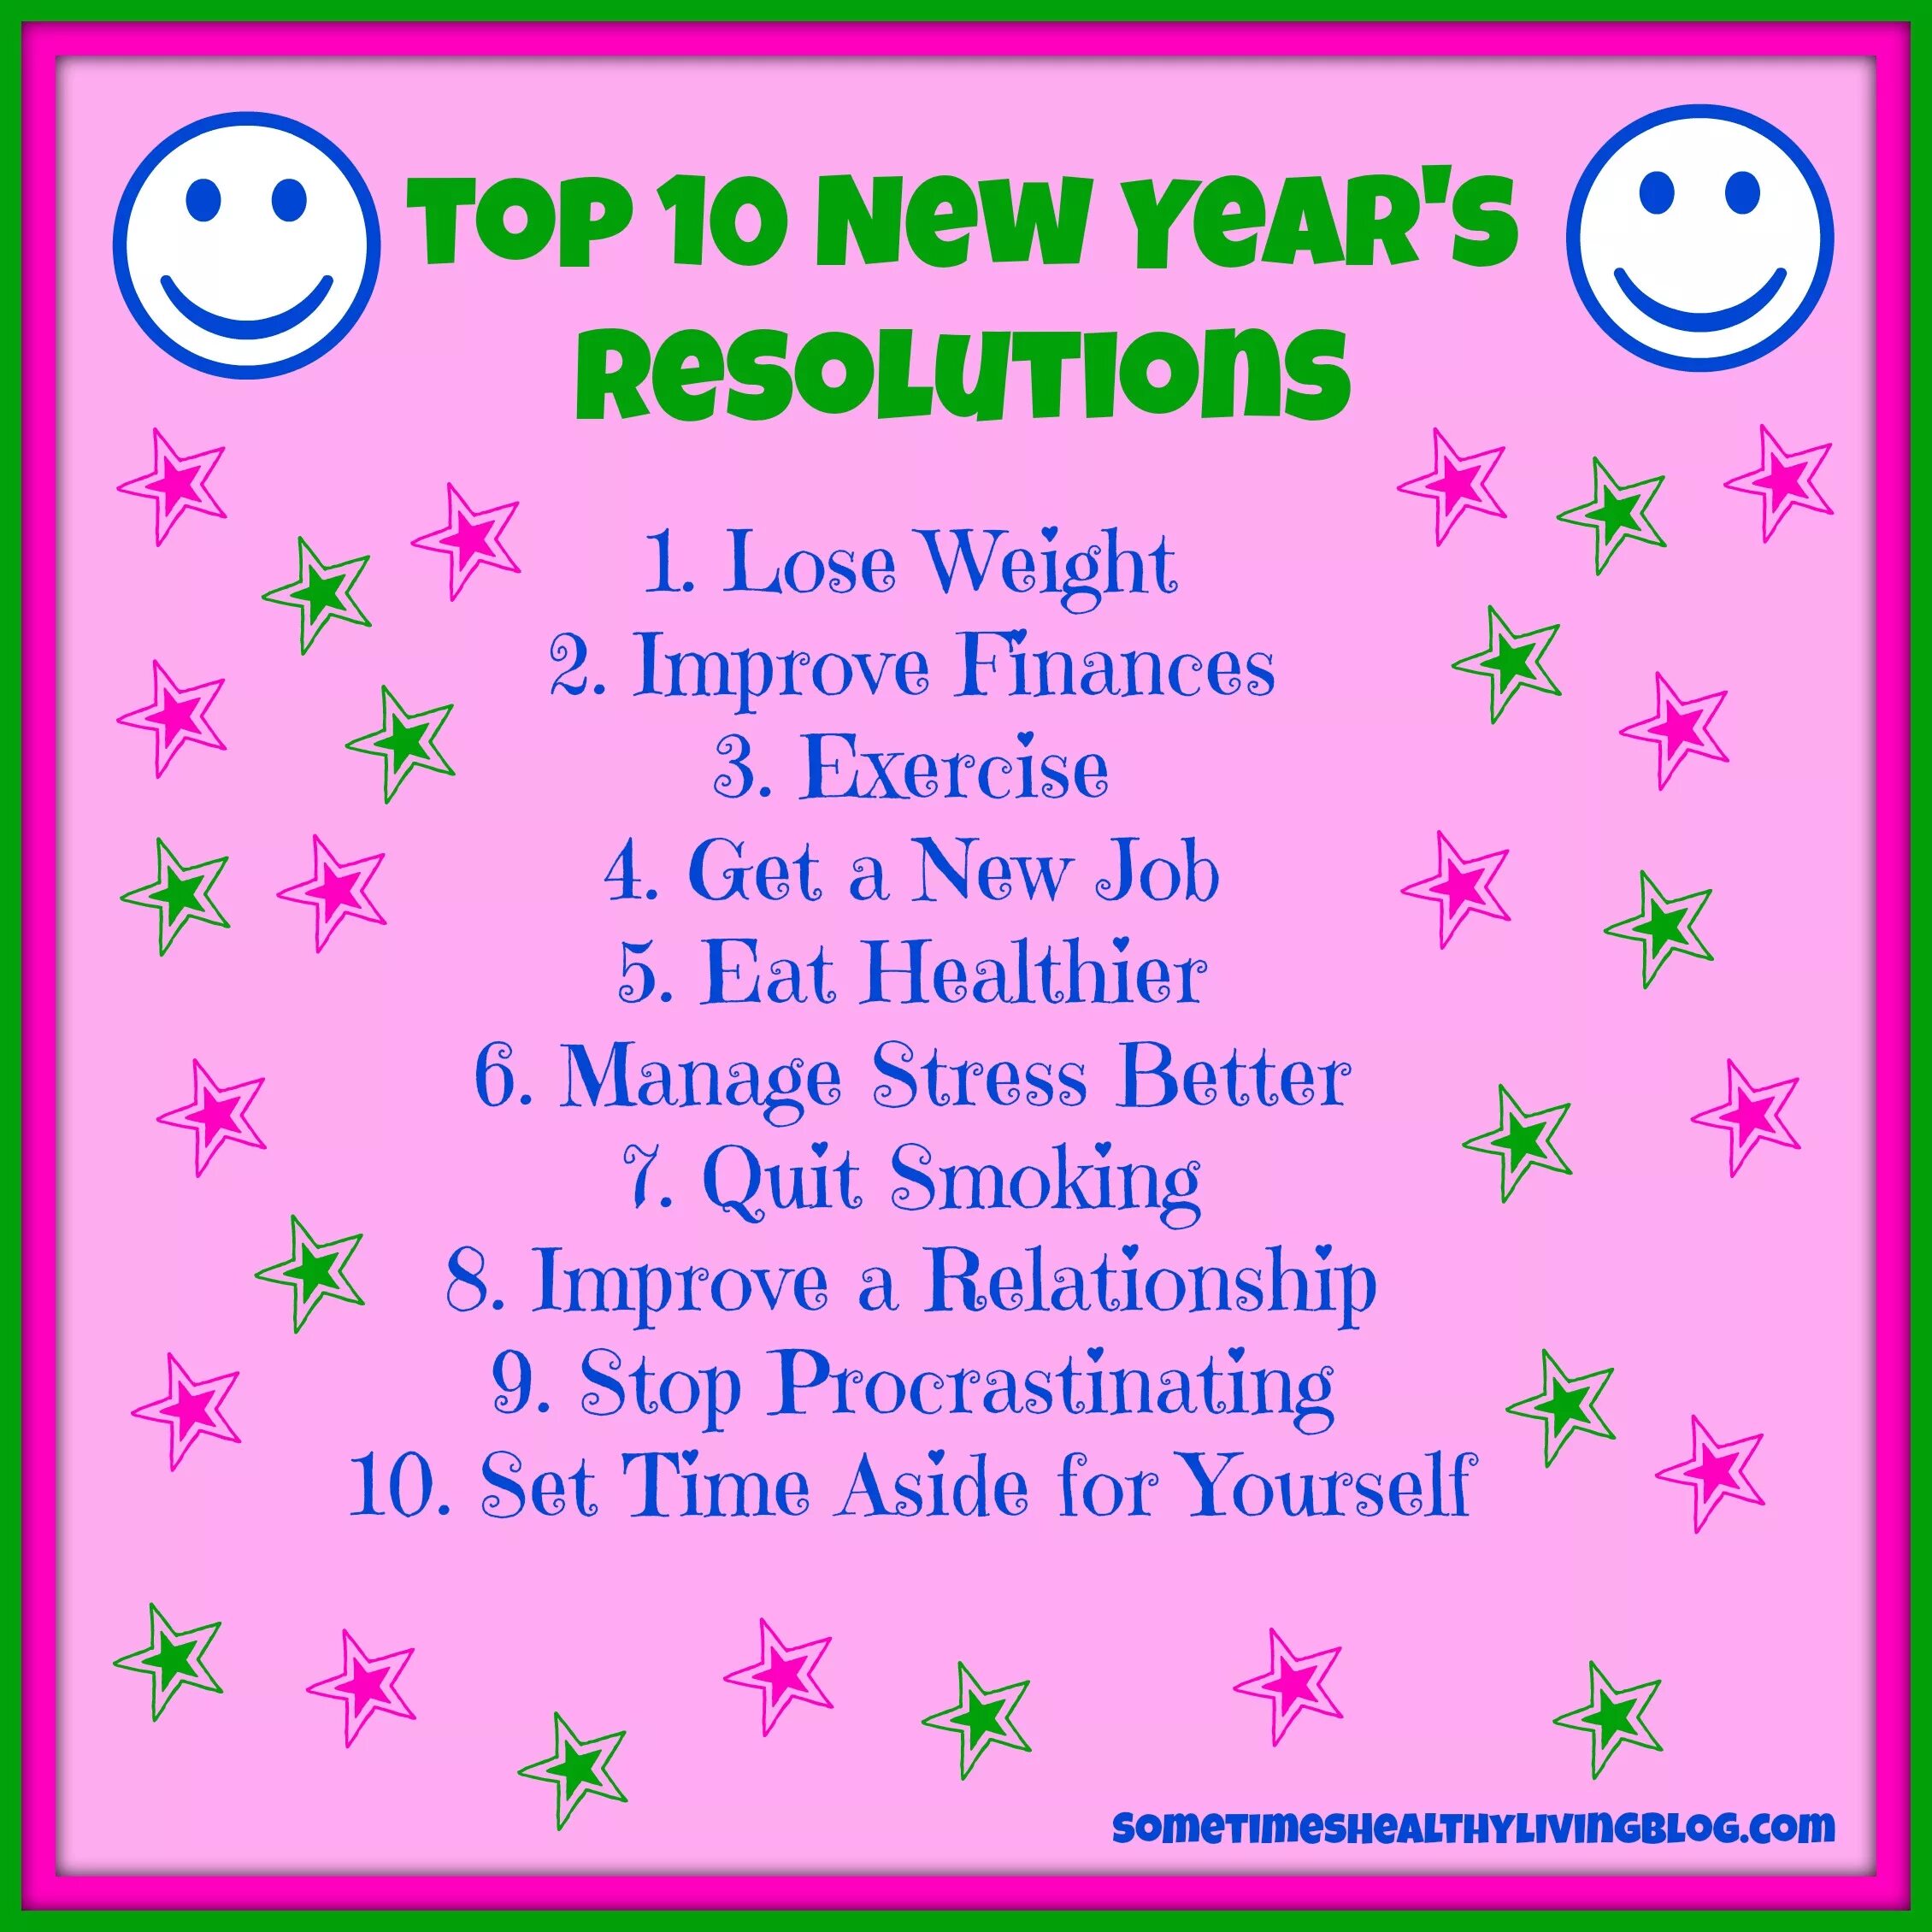 New year plans. New year Resolutions примеры. My New year Resolutions примеры. New year Resolutions list. New year Resolutions ideas.